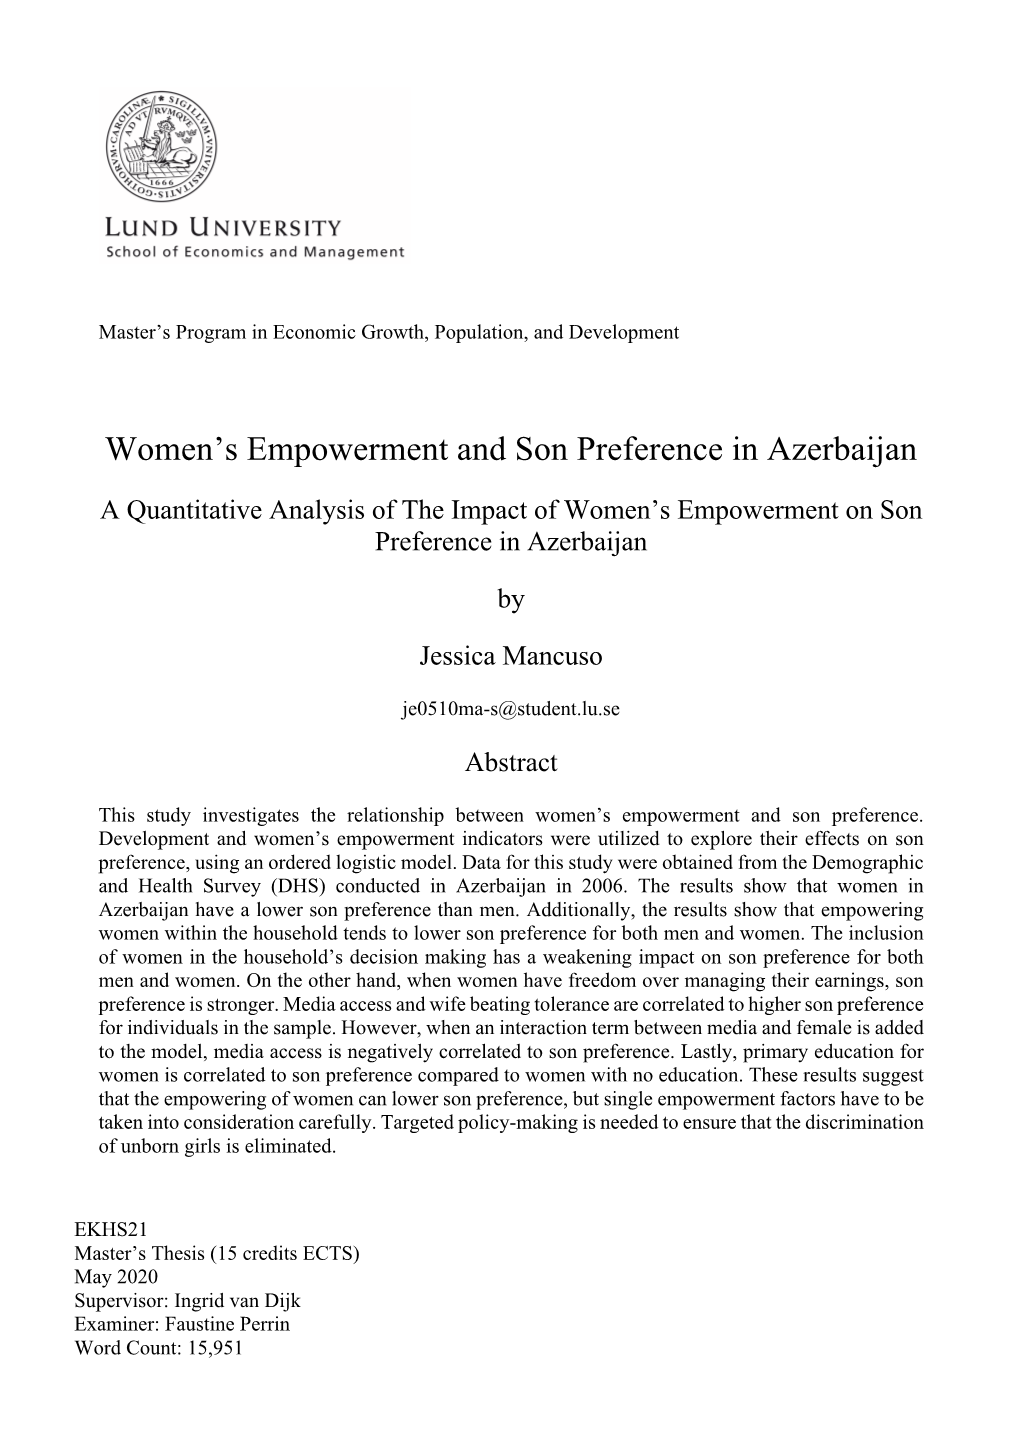 Women's Empowerment and Son Preference in Azerbaijan